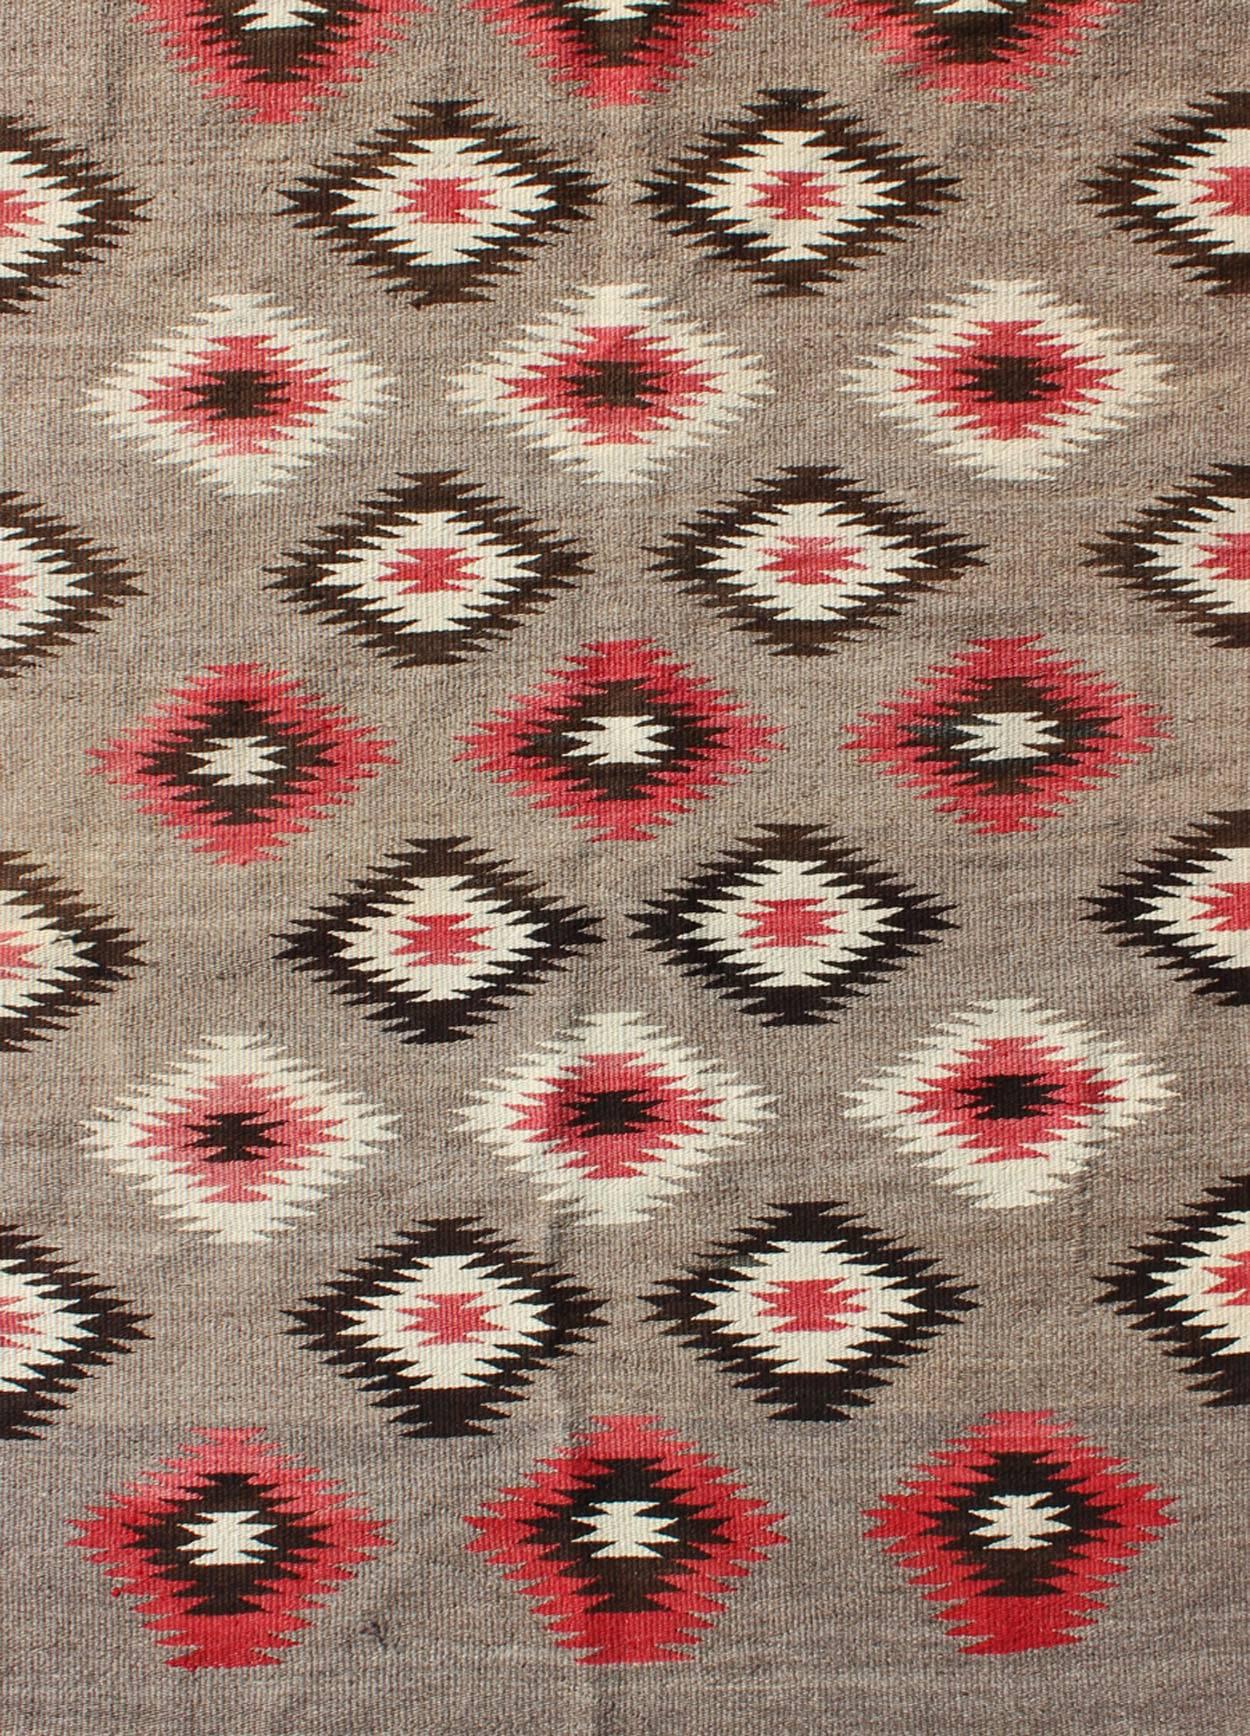 Hand-Woven American Navajo Rug with Geometric All-Over Design in Reds and Browns For Sale